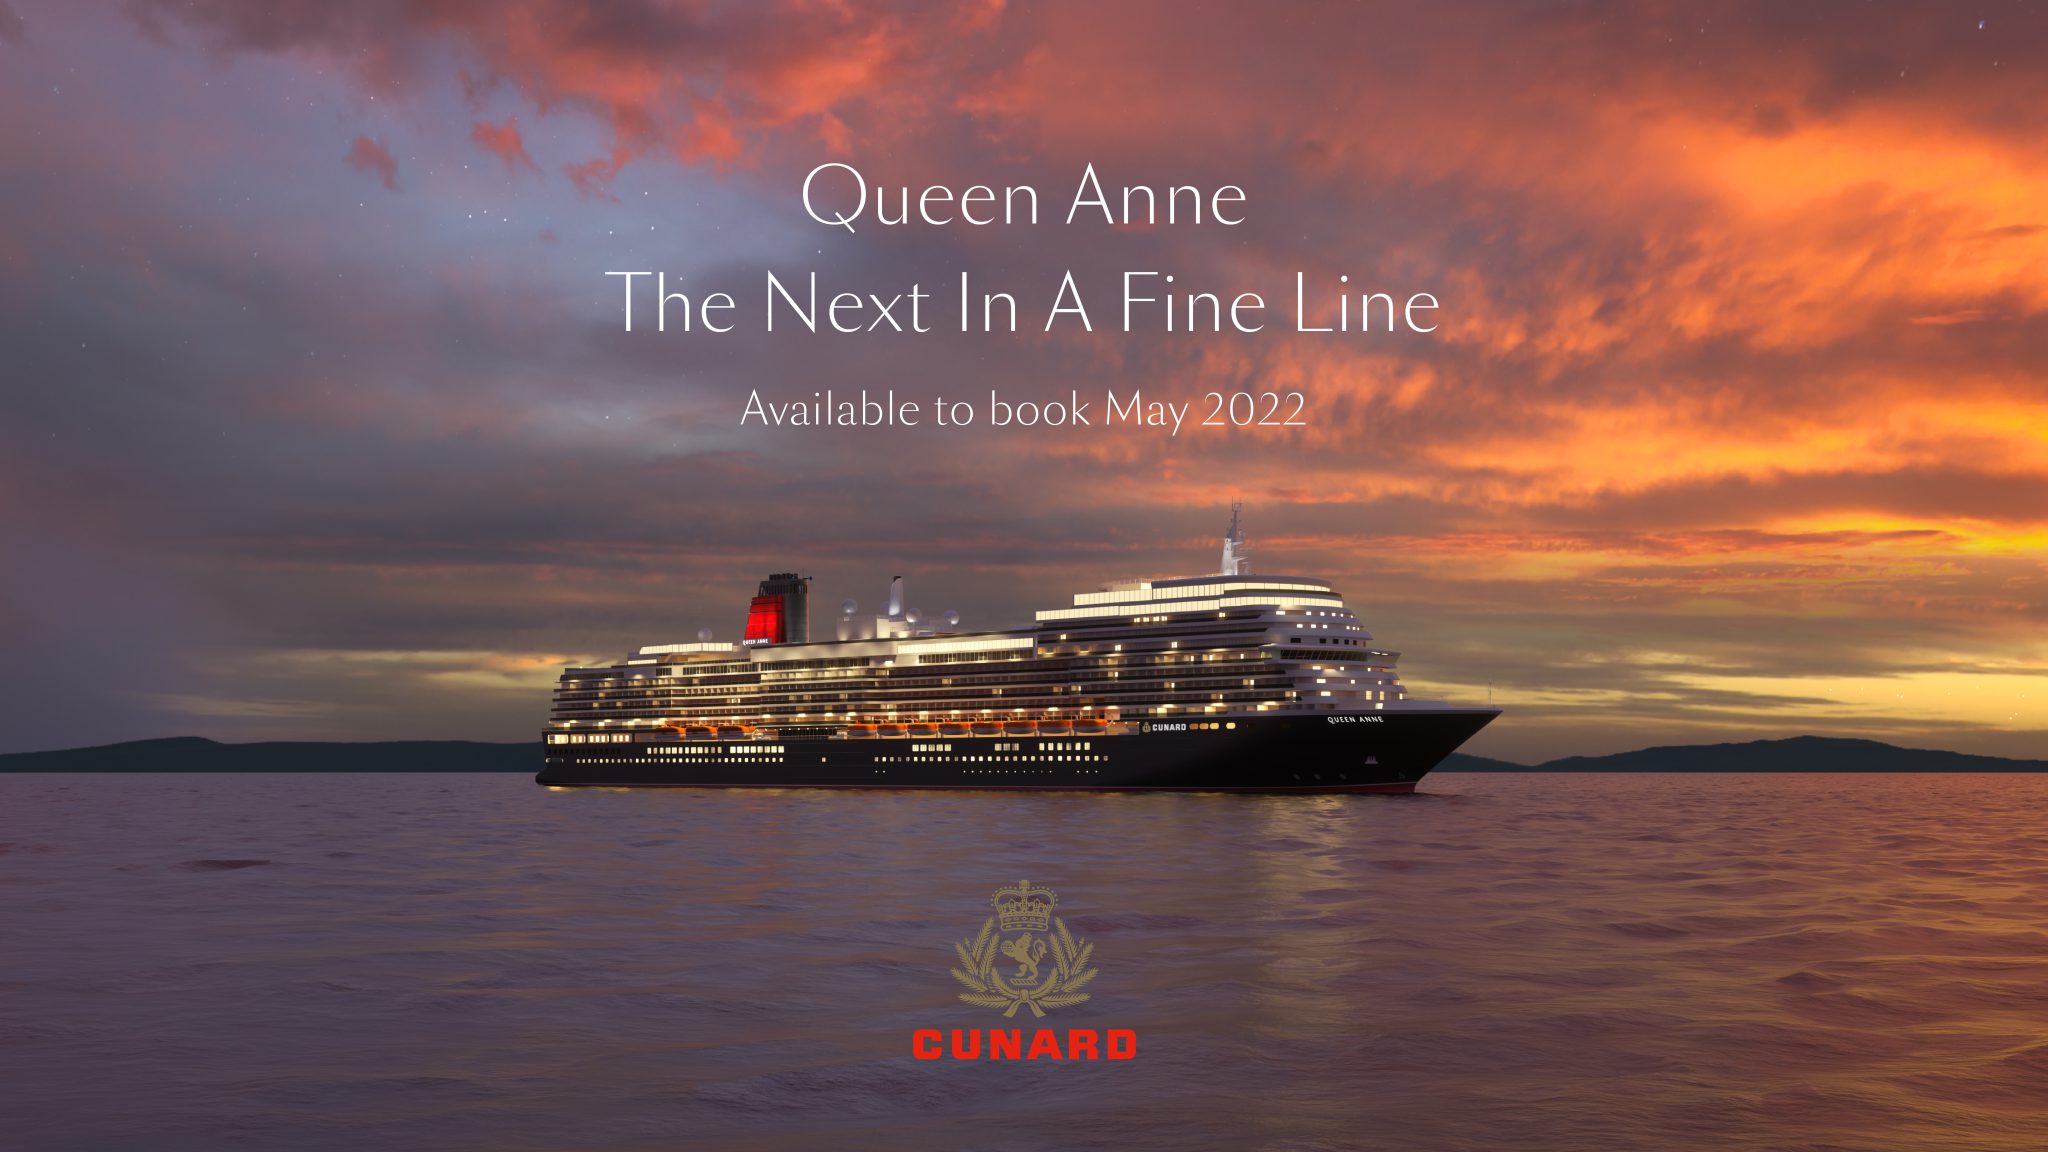 Get aboard the new Queen Anne offering 10 voyages to 33 exotic